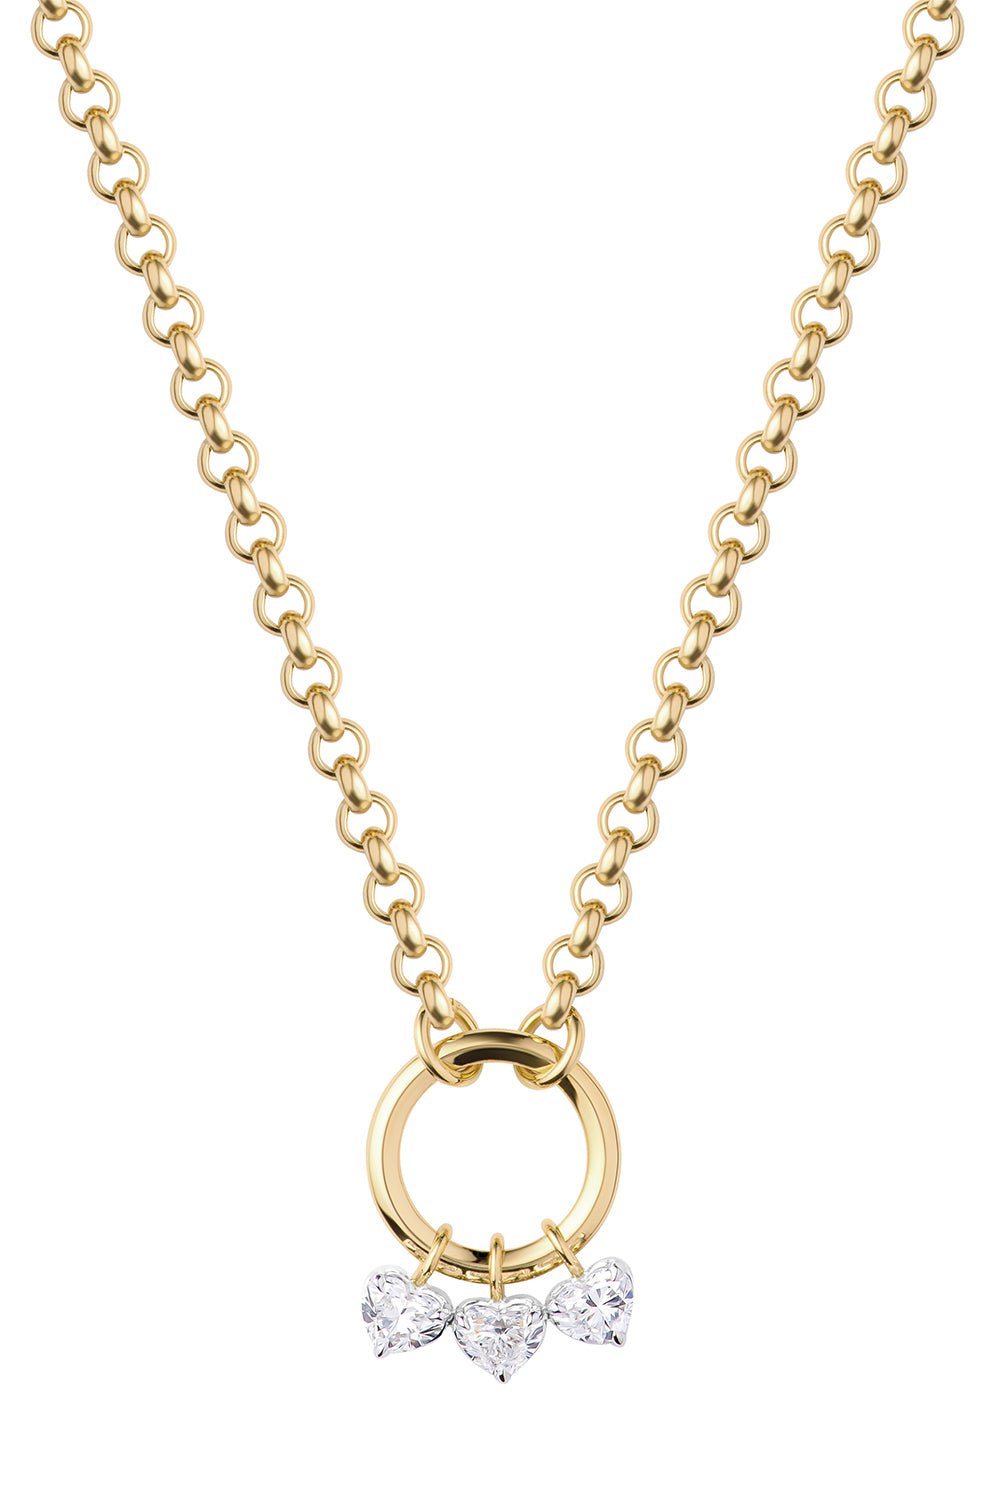 PHILLIPS HOUSE-Triple Heart Necklace-YELLOW GOLD